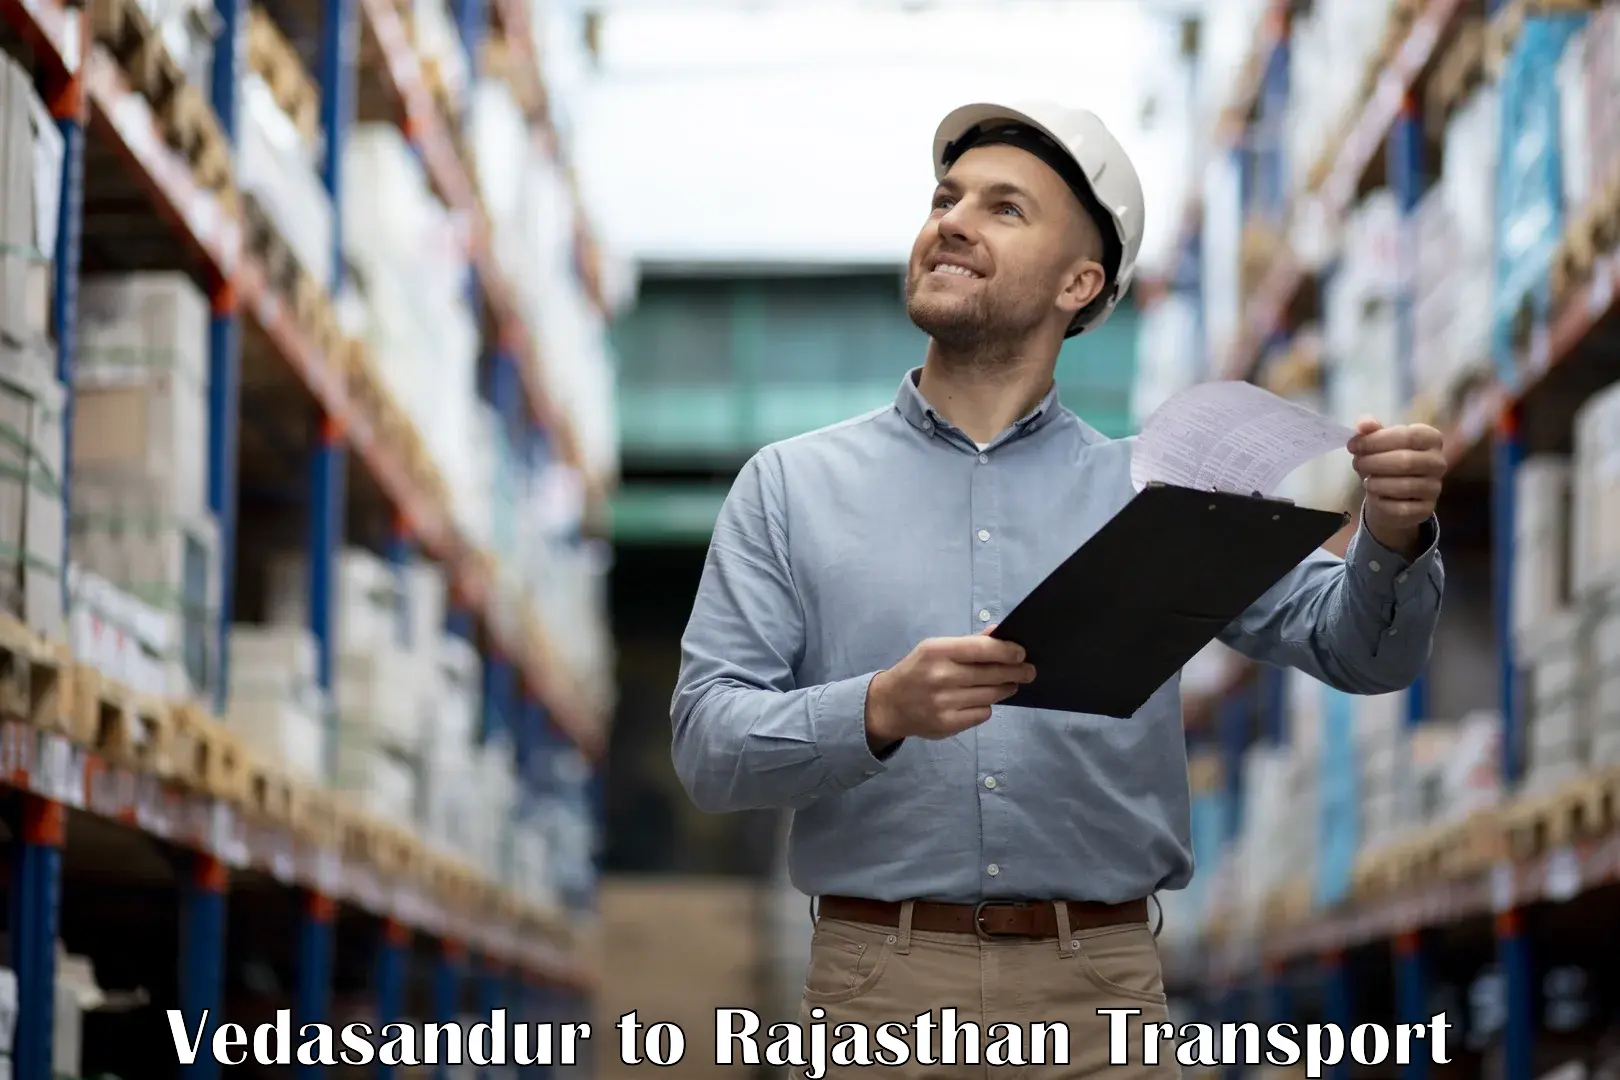 Commercial transport service Vedasandur to Bassi